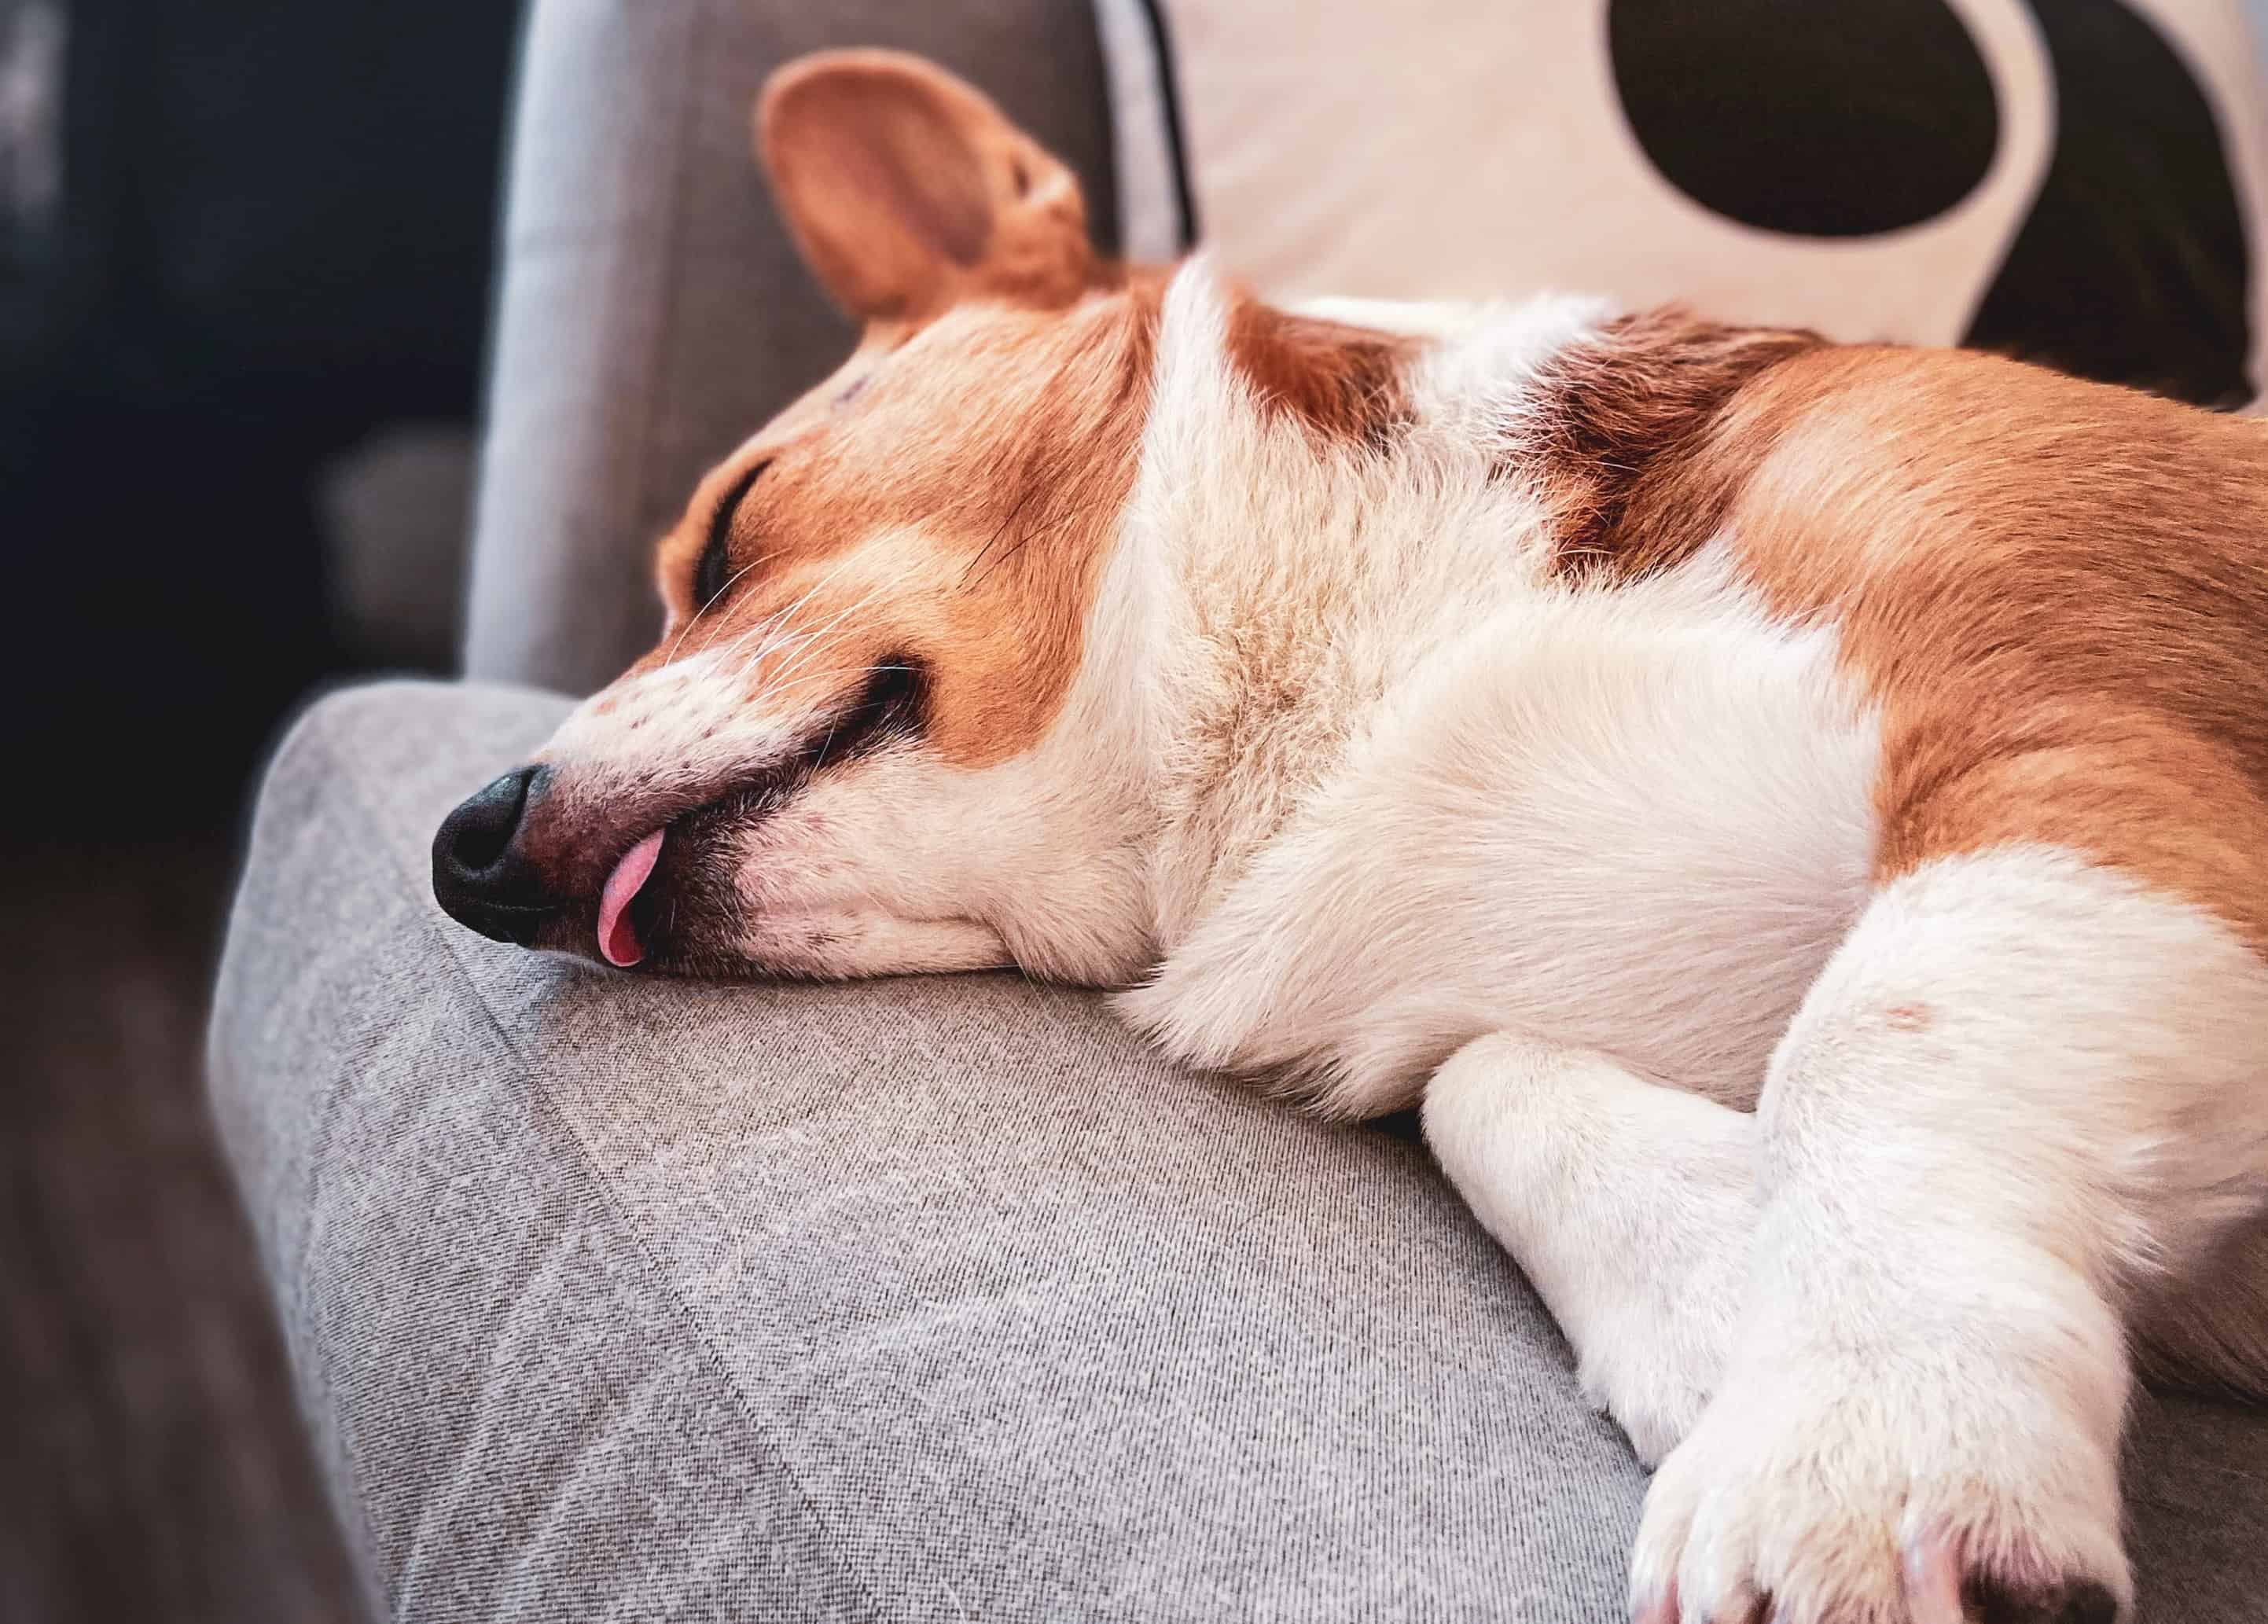 A white and gold pembroke welsh corgi blissfully sleeping on a couch with their tongue hanging out.